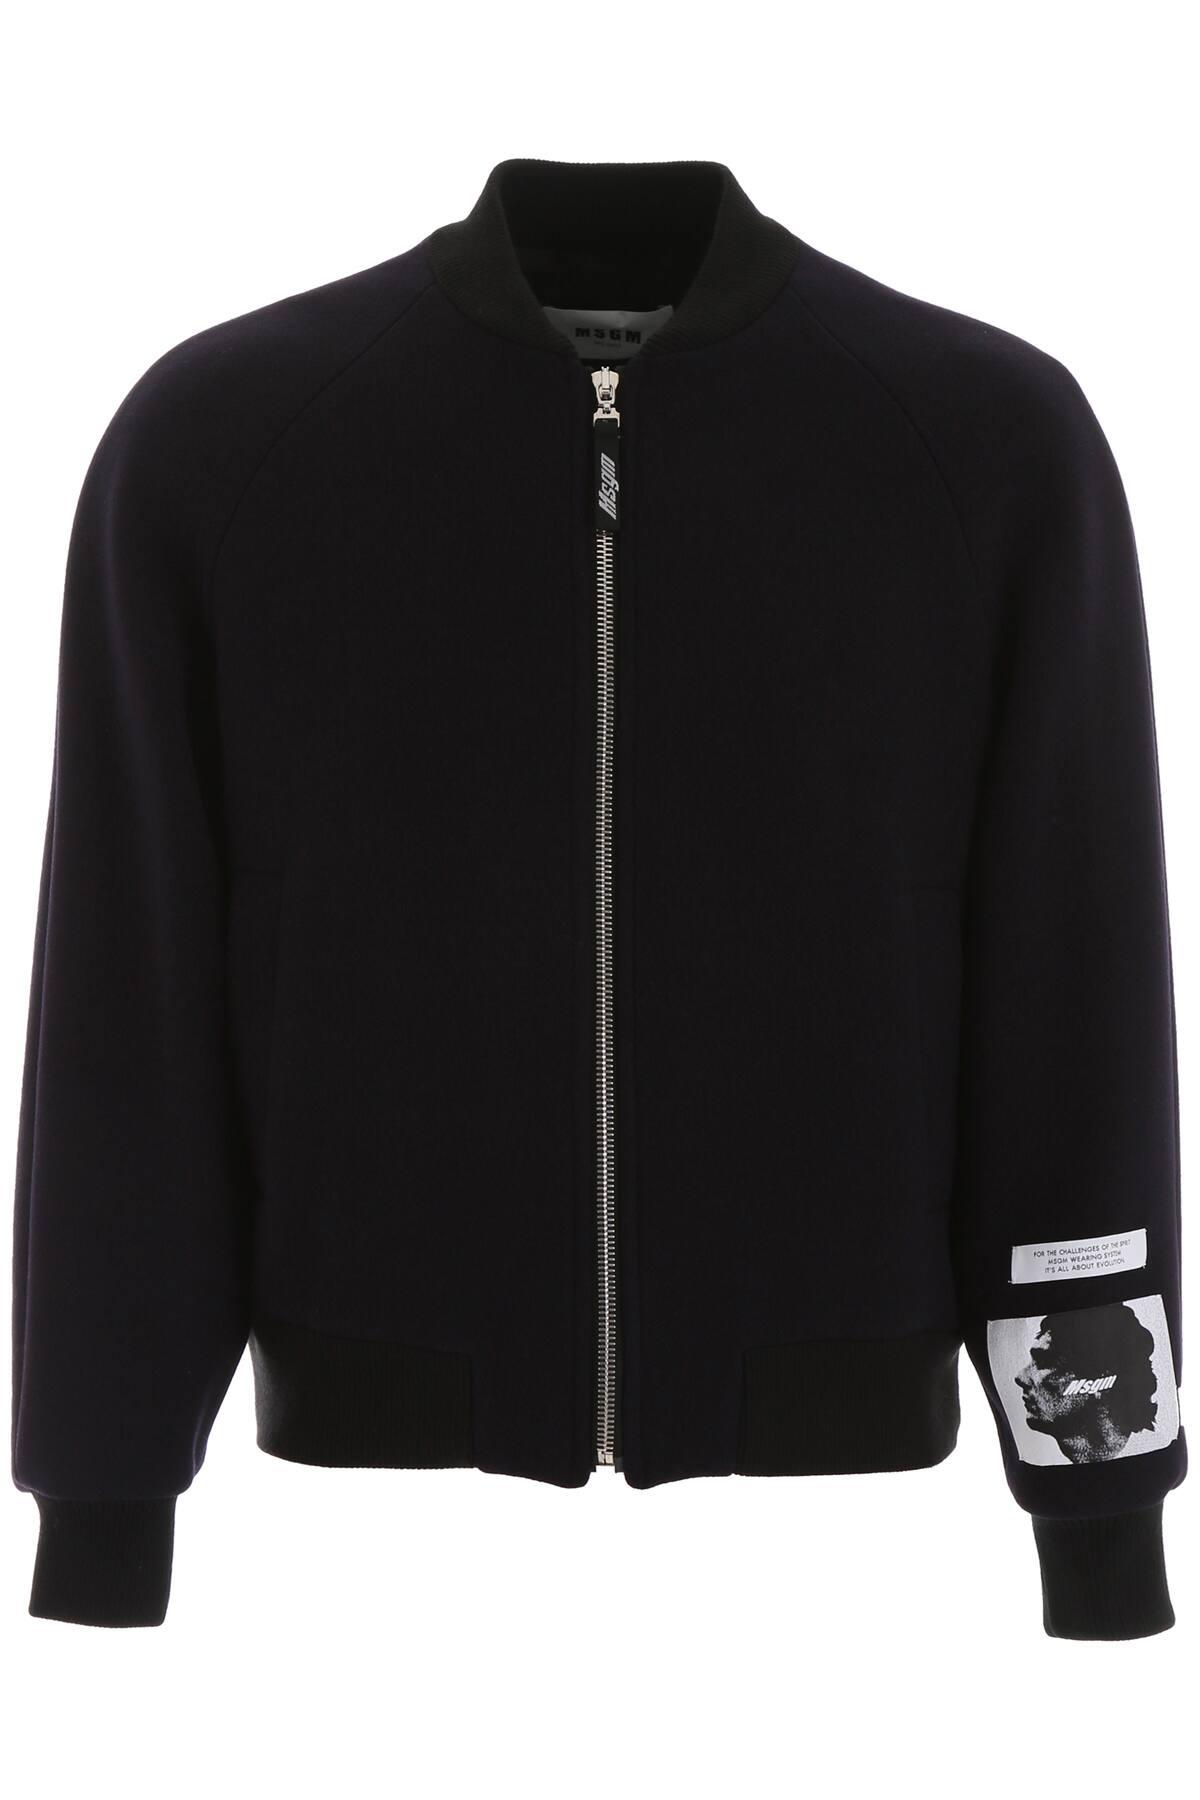 MSGM Wool Turbo Bomber Jacket in Blue for Men - Save 38% - Lyst